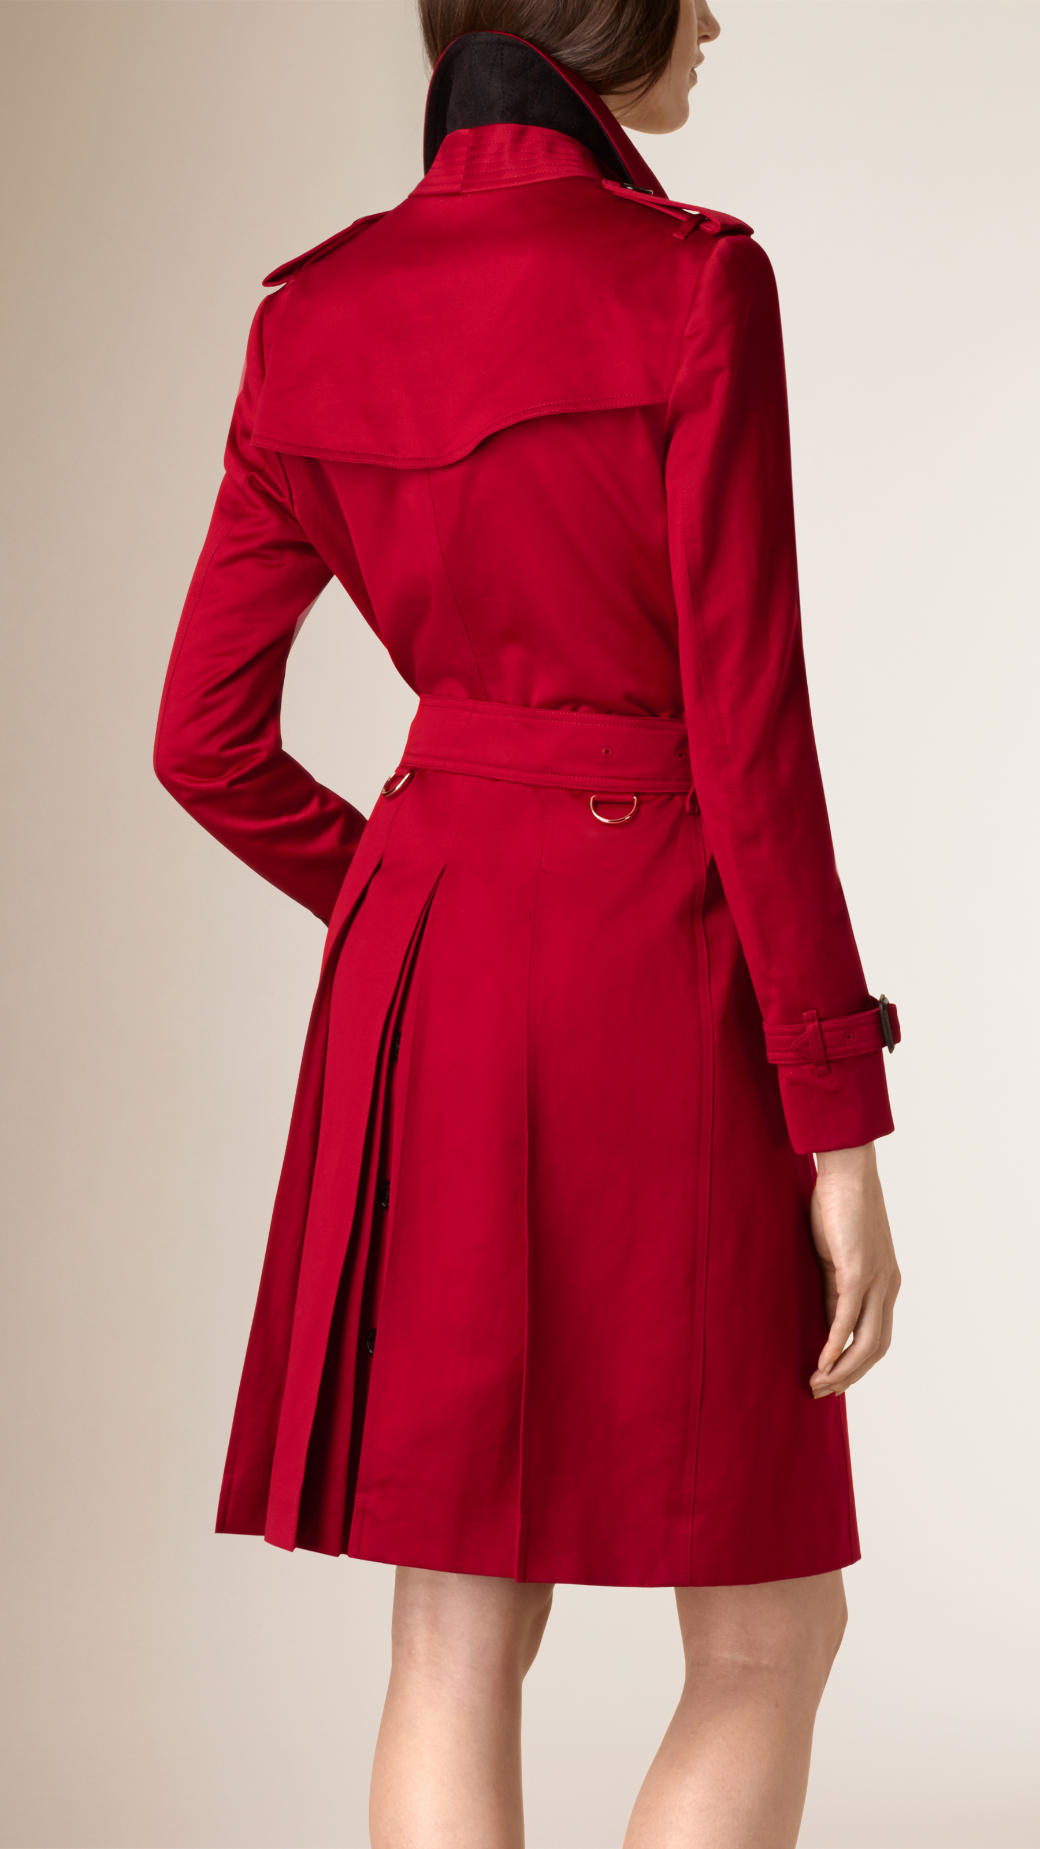 Burberry Pleated Skirt Cotton Sateen Trench Coat in Red - Lyst